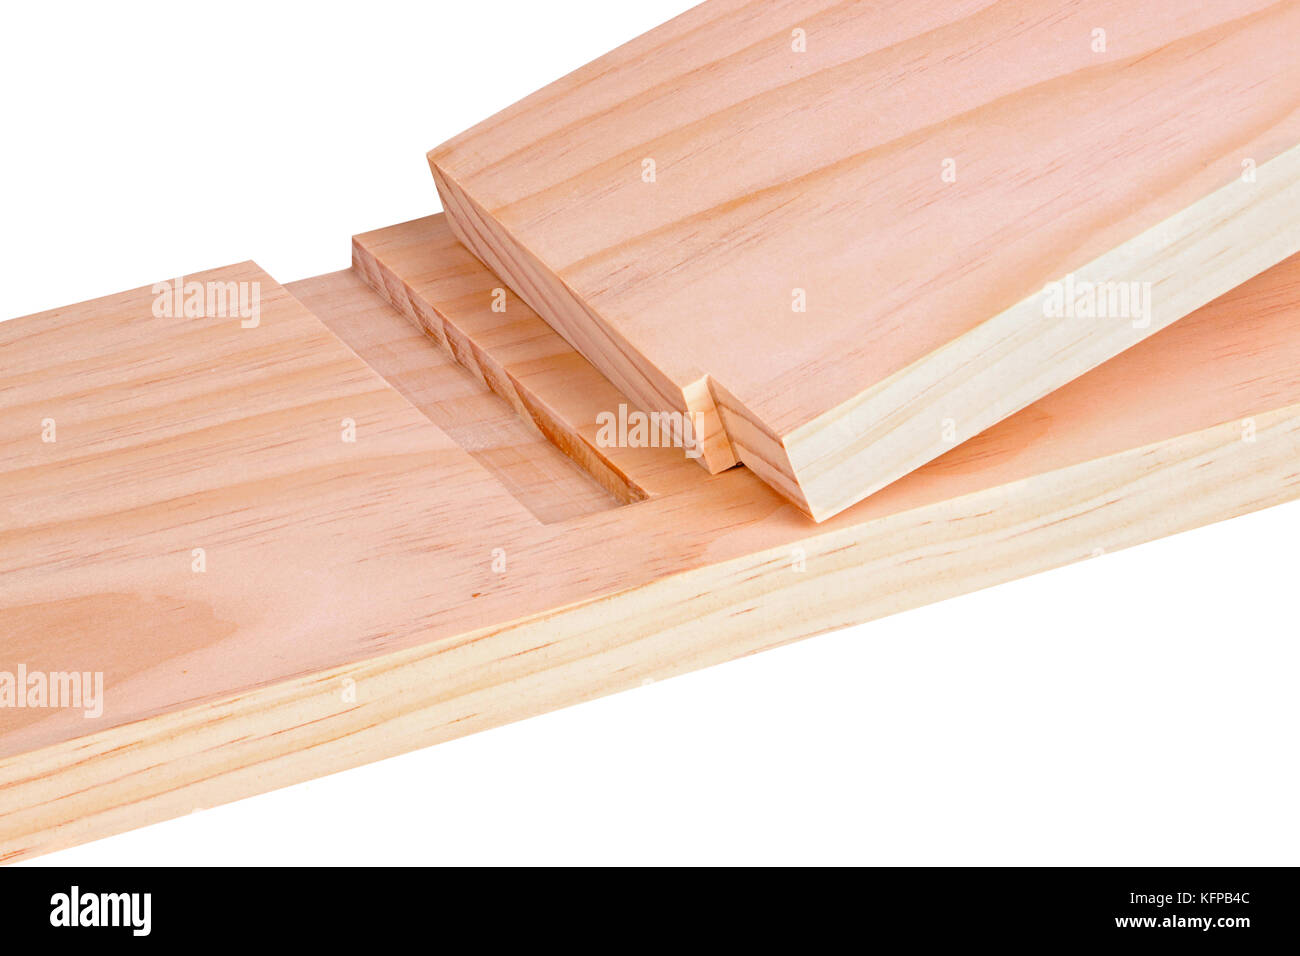 Close-up of two pine boards cut for a blind or stopped dado joint isolated against a white background Stock Photo